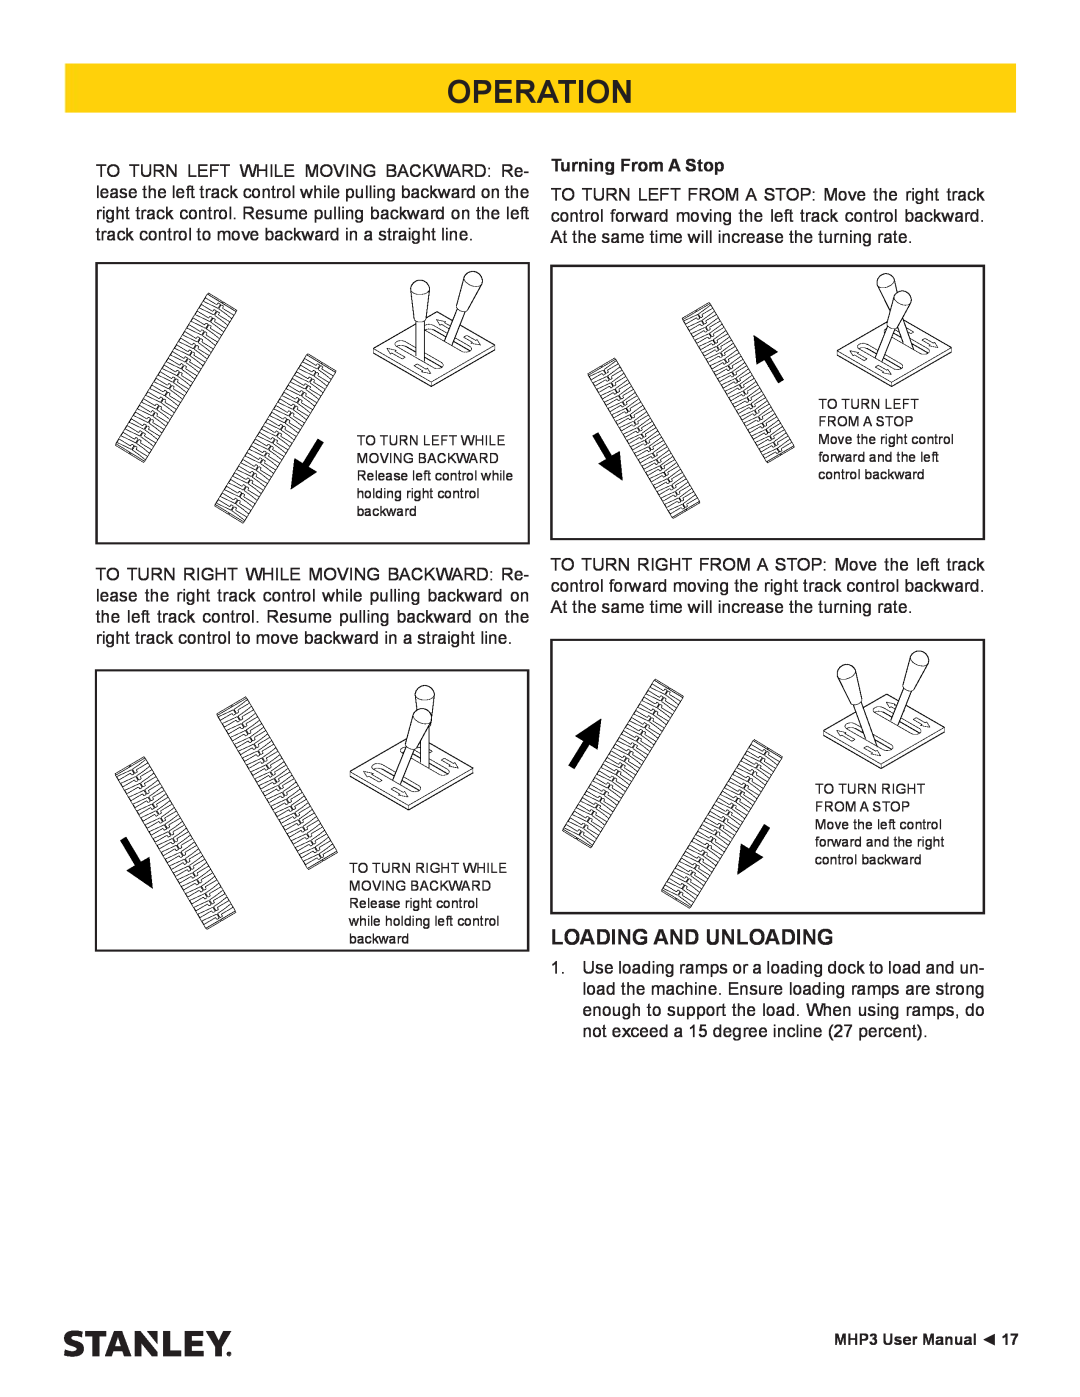 Stanley Black & Decker MHP3 user manual Loading And Unloading, Operation, Turning From A Stop 